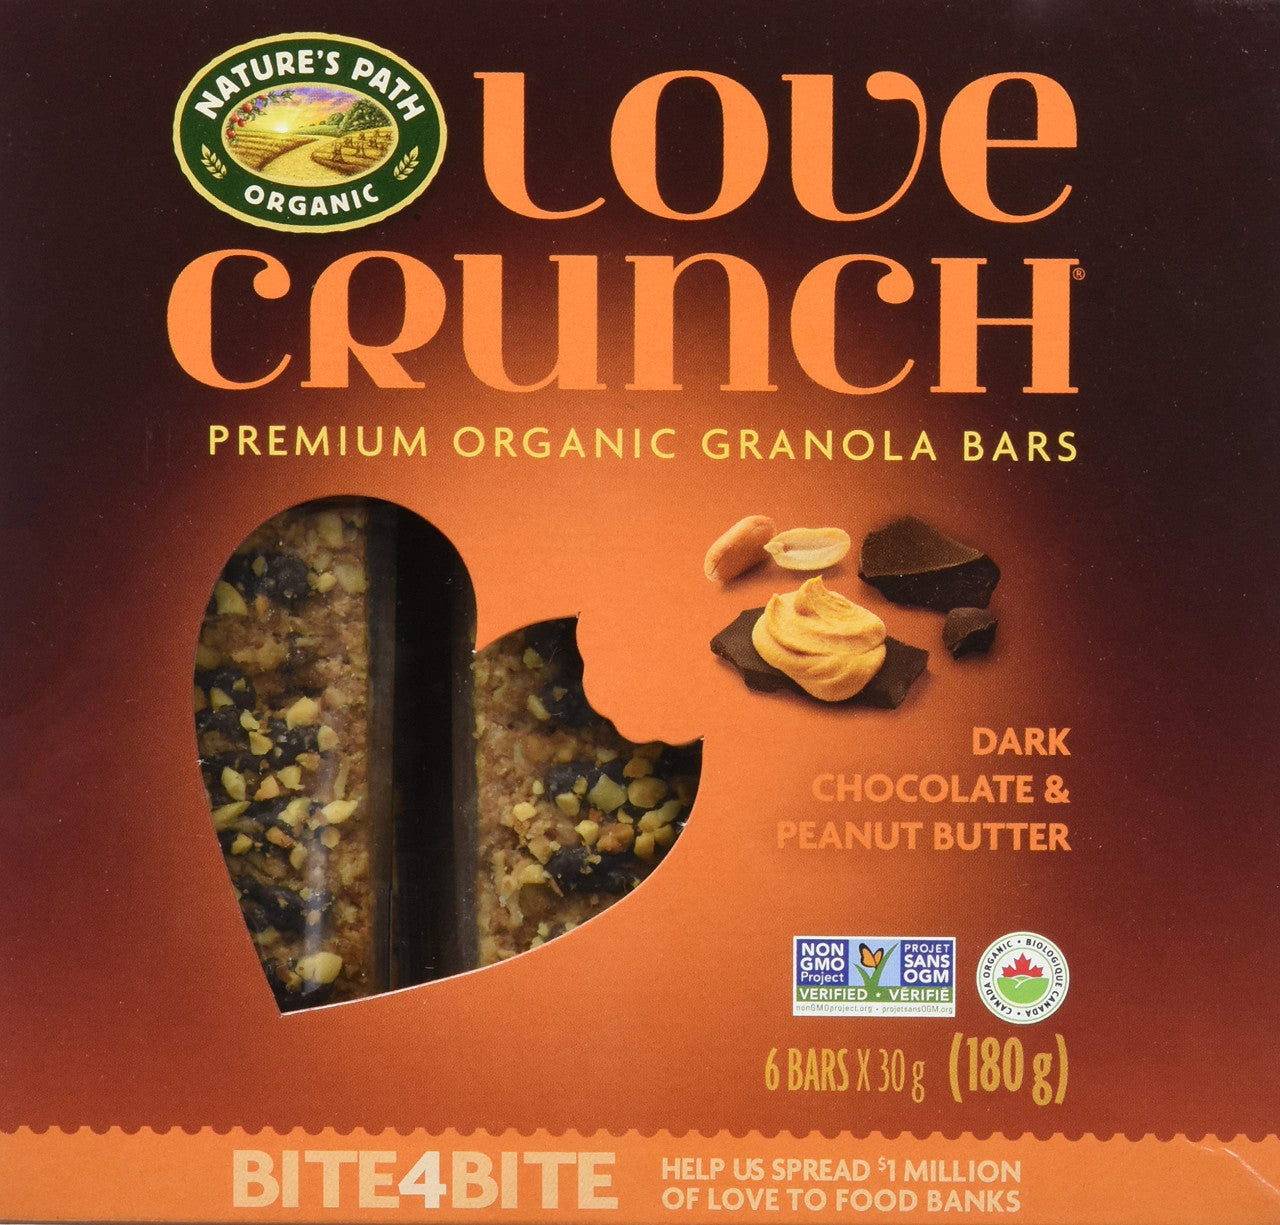 Nature's Path Organic Granola Bar - Love Crunch Chocolate Peanut Butter, 180g/6.3oz., {Imported from Canada}